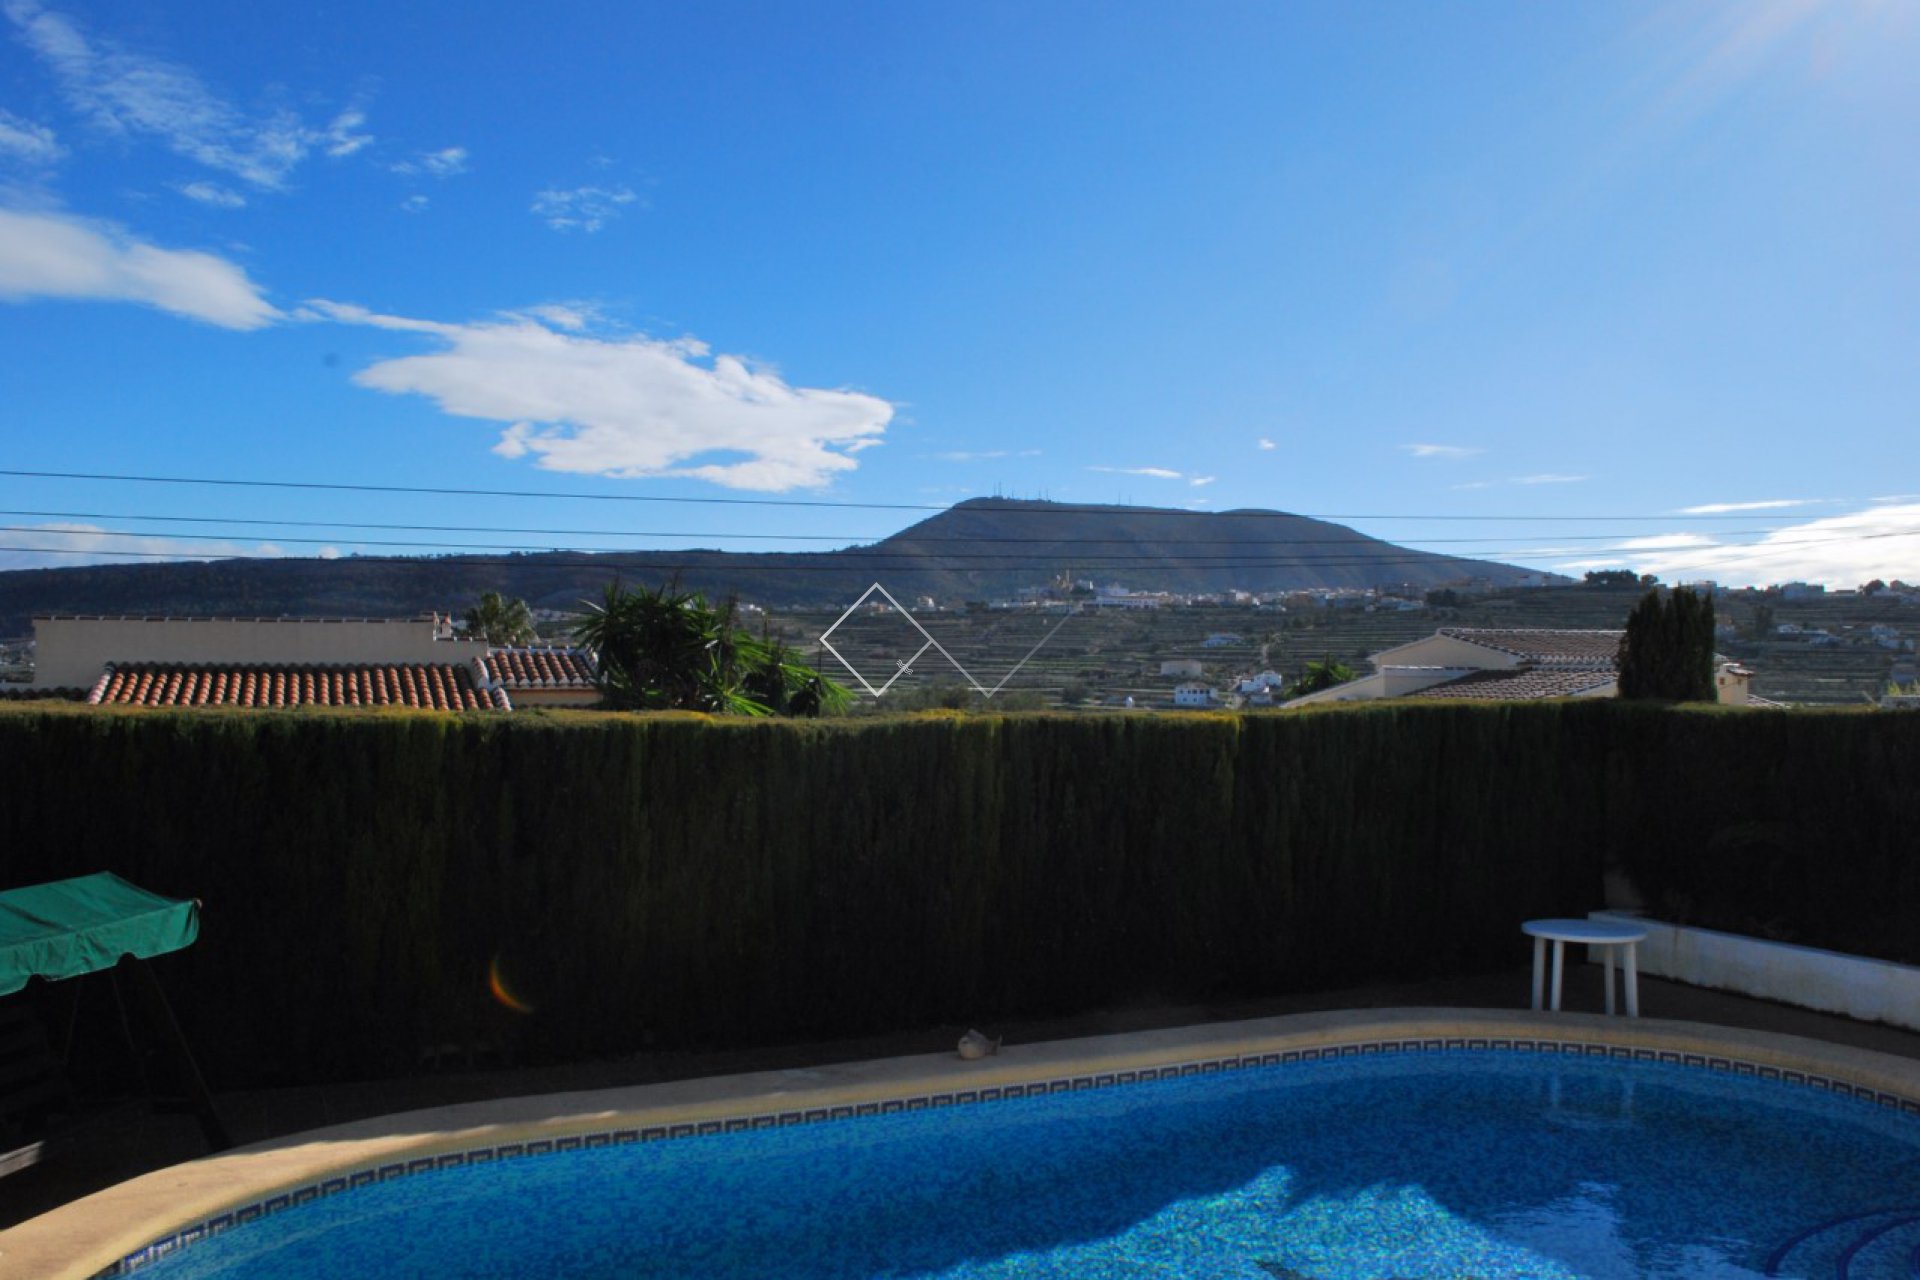 Detached villa on 1 level, located within the urbanisation of Les Fonts, on just a short distance to the town and at 10 minutes drive to the coast